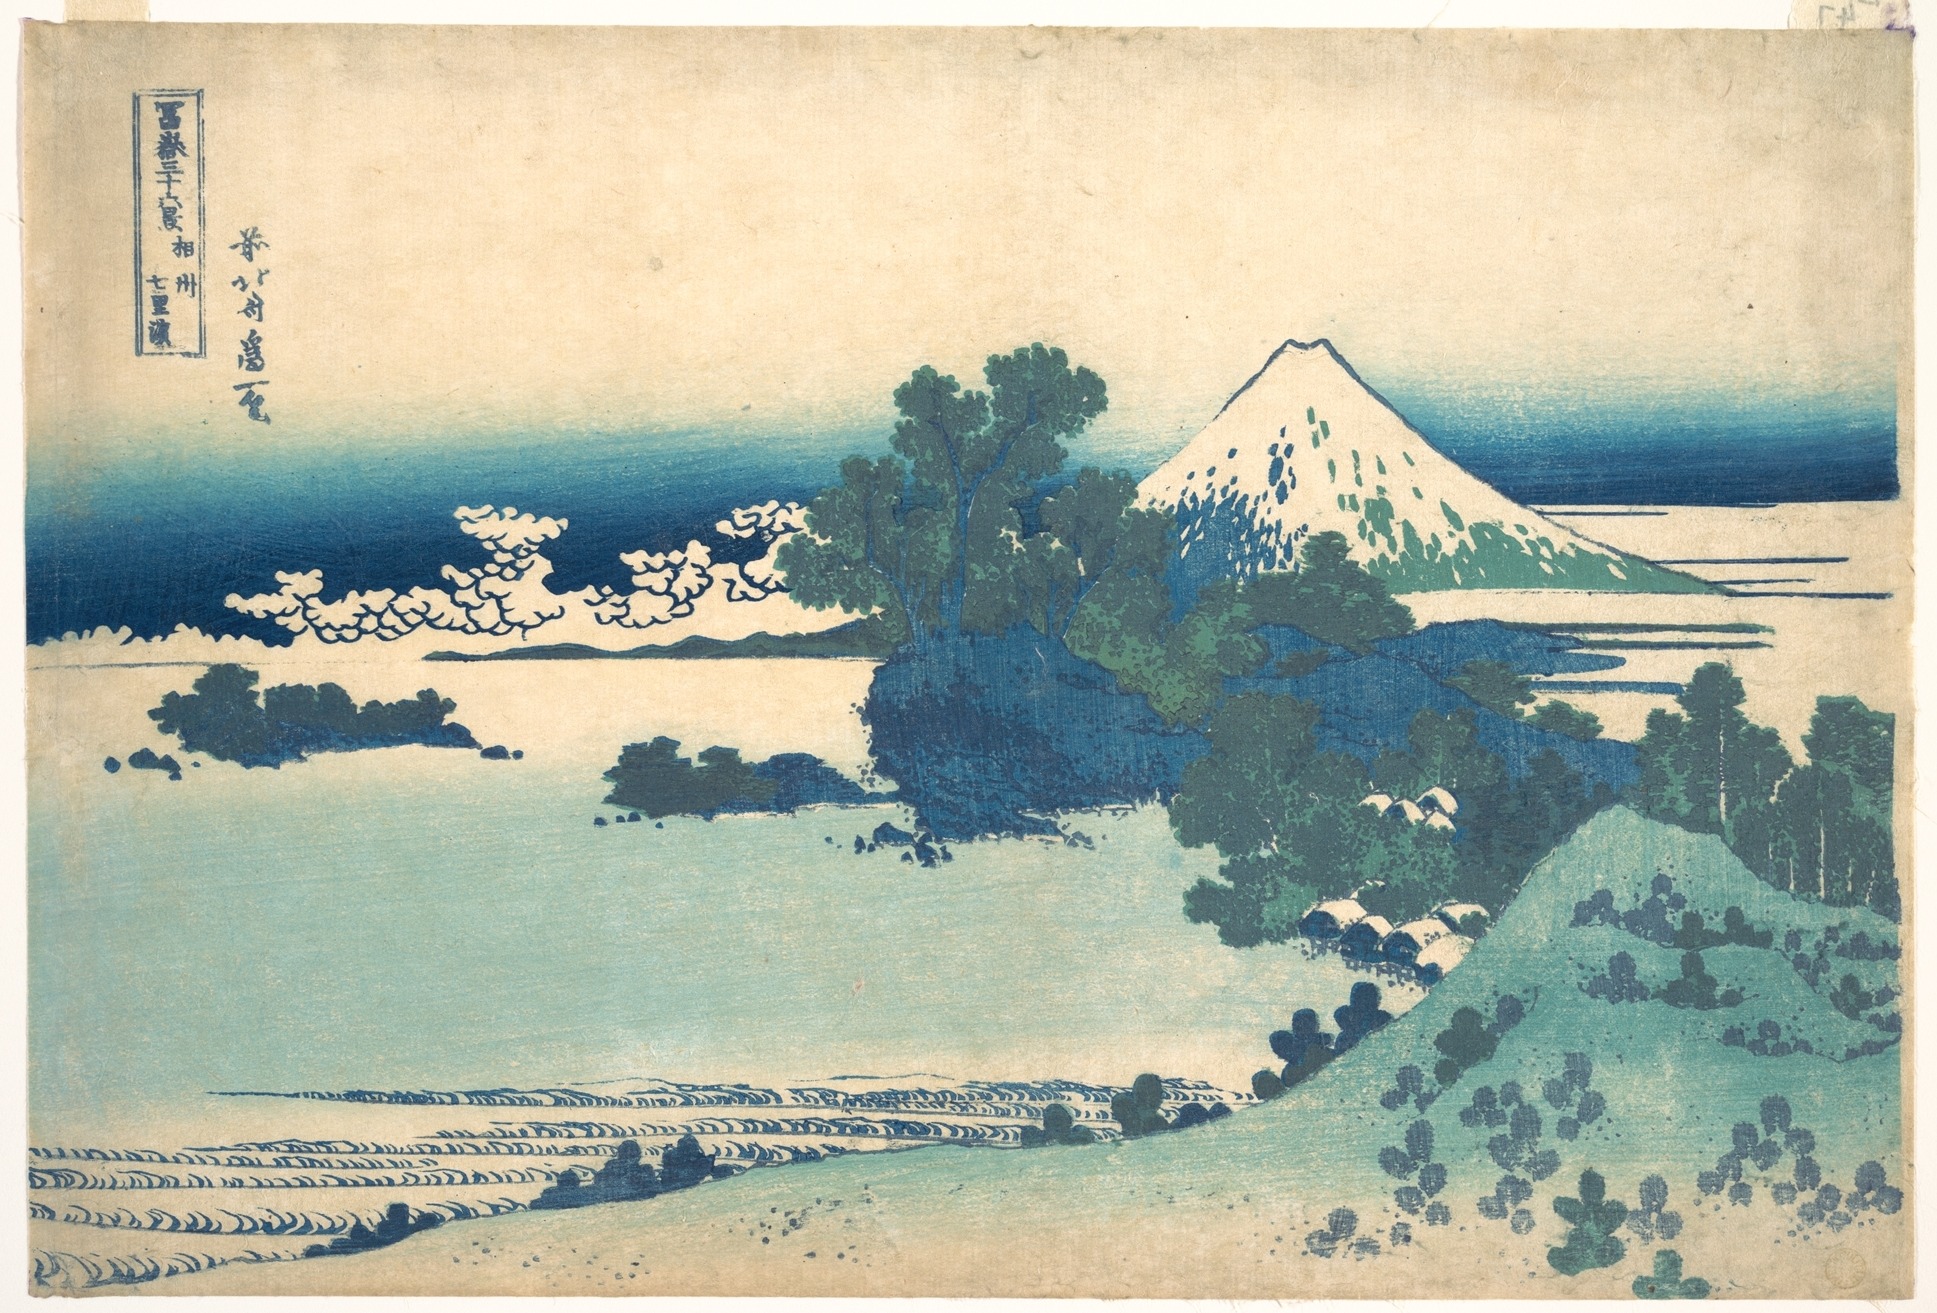 Shichirigahama in Sagami Province, from the series Thirty-six Views of Mount Fuji